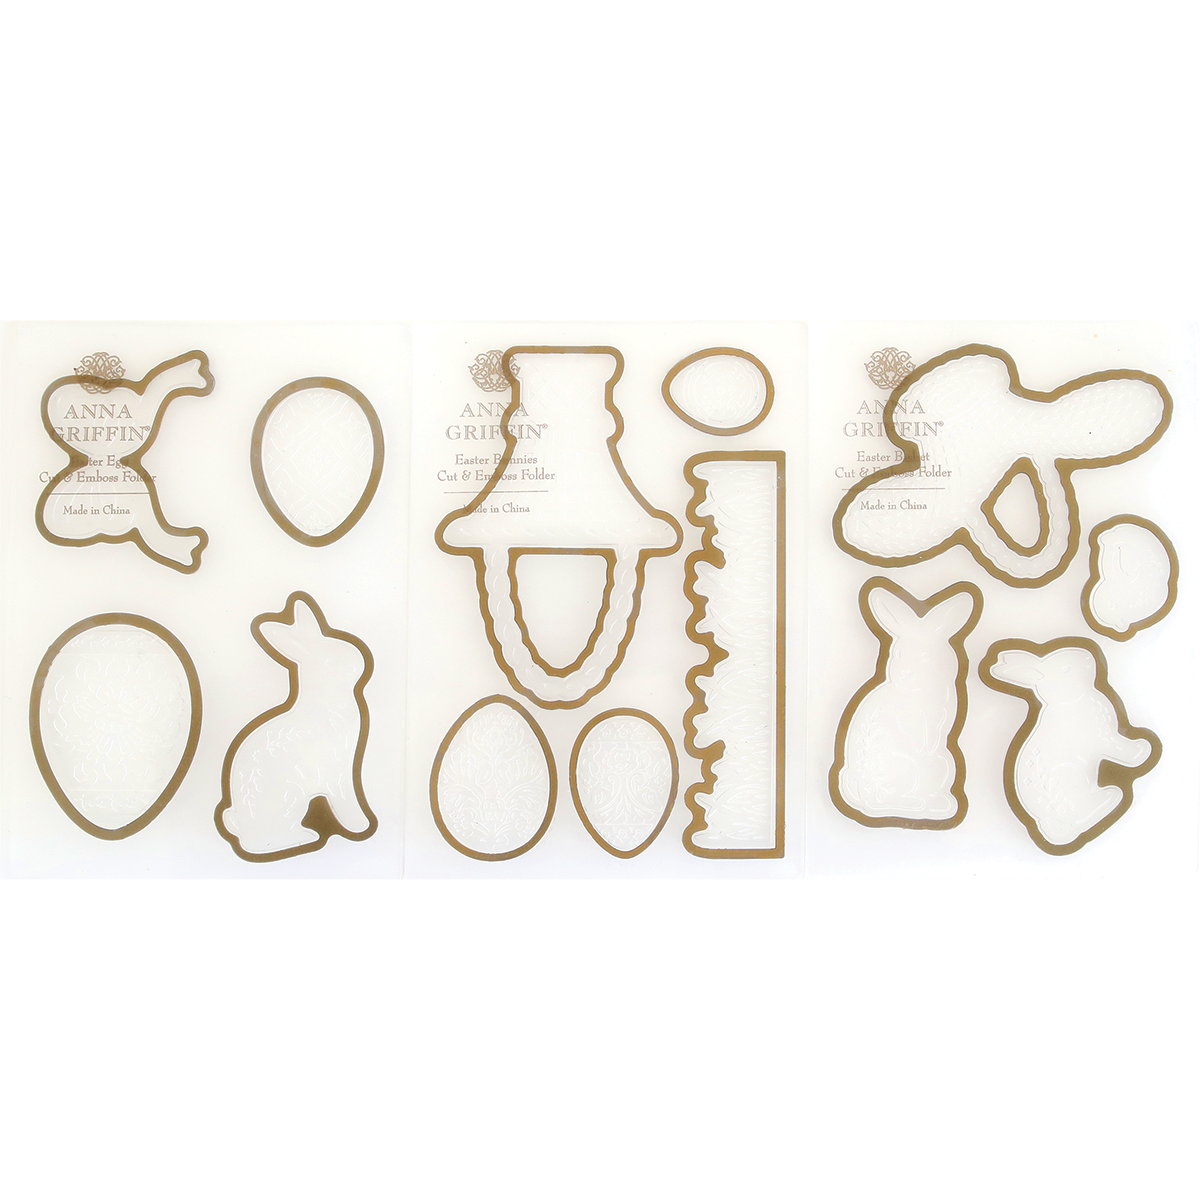 a set of cookie cutters with various shapes.